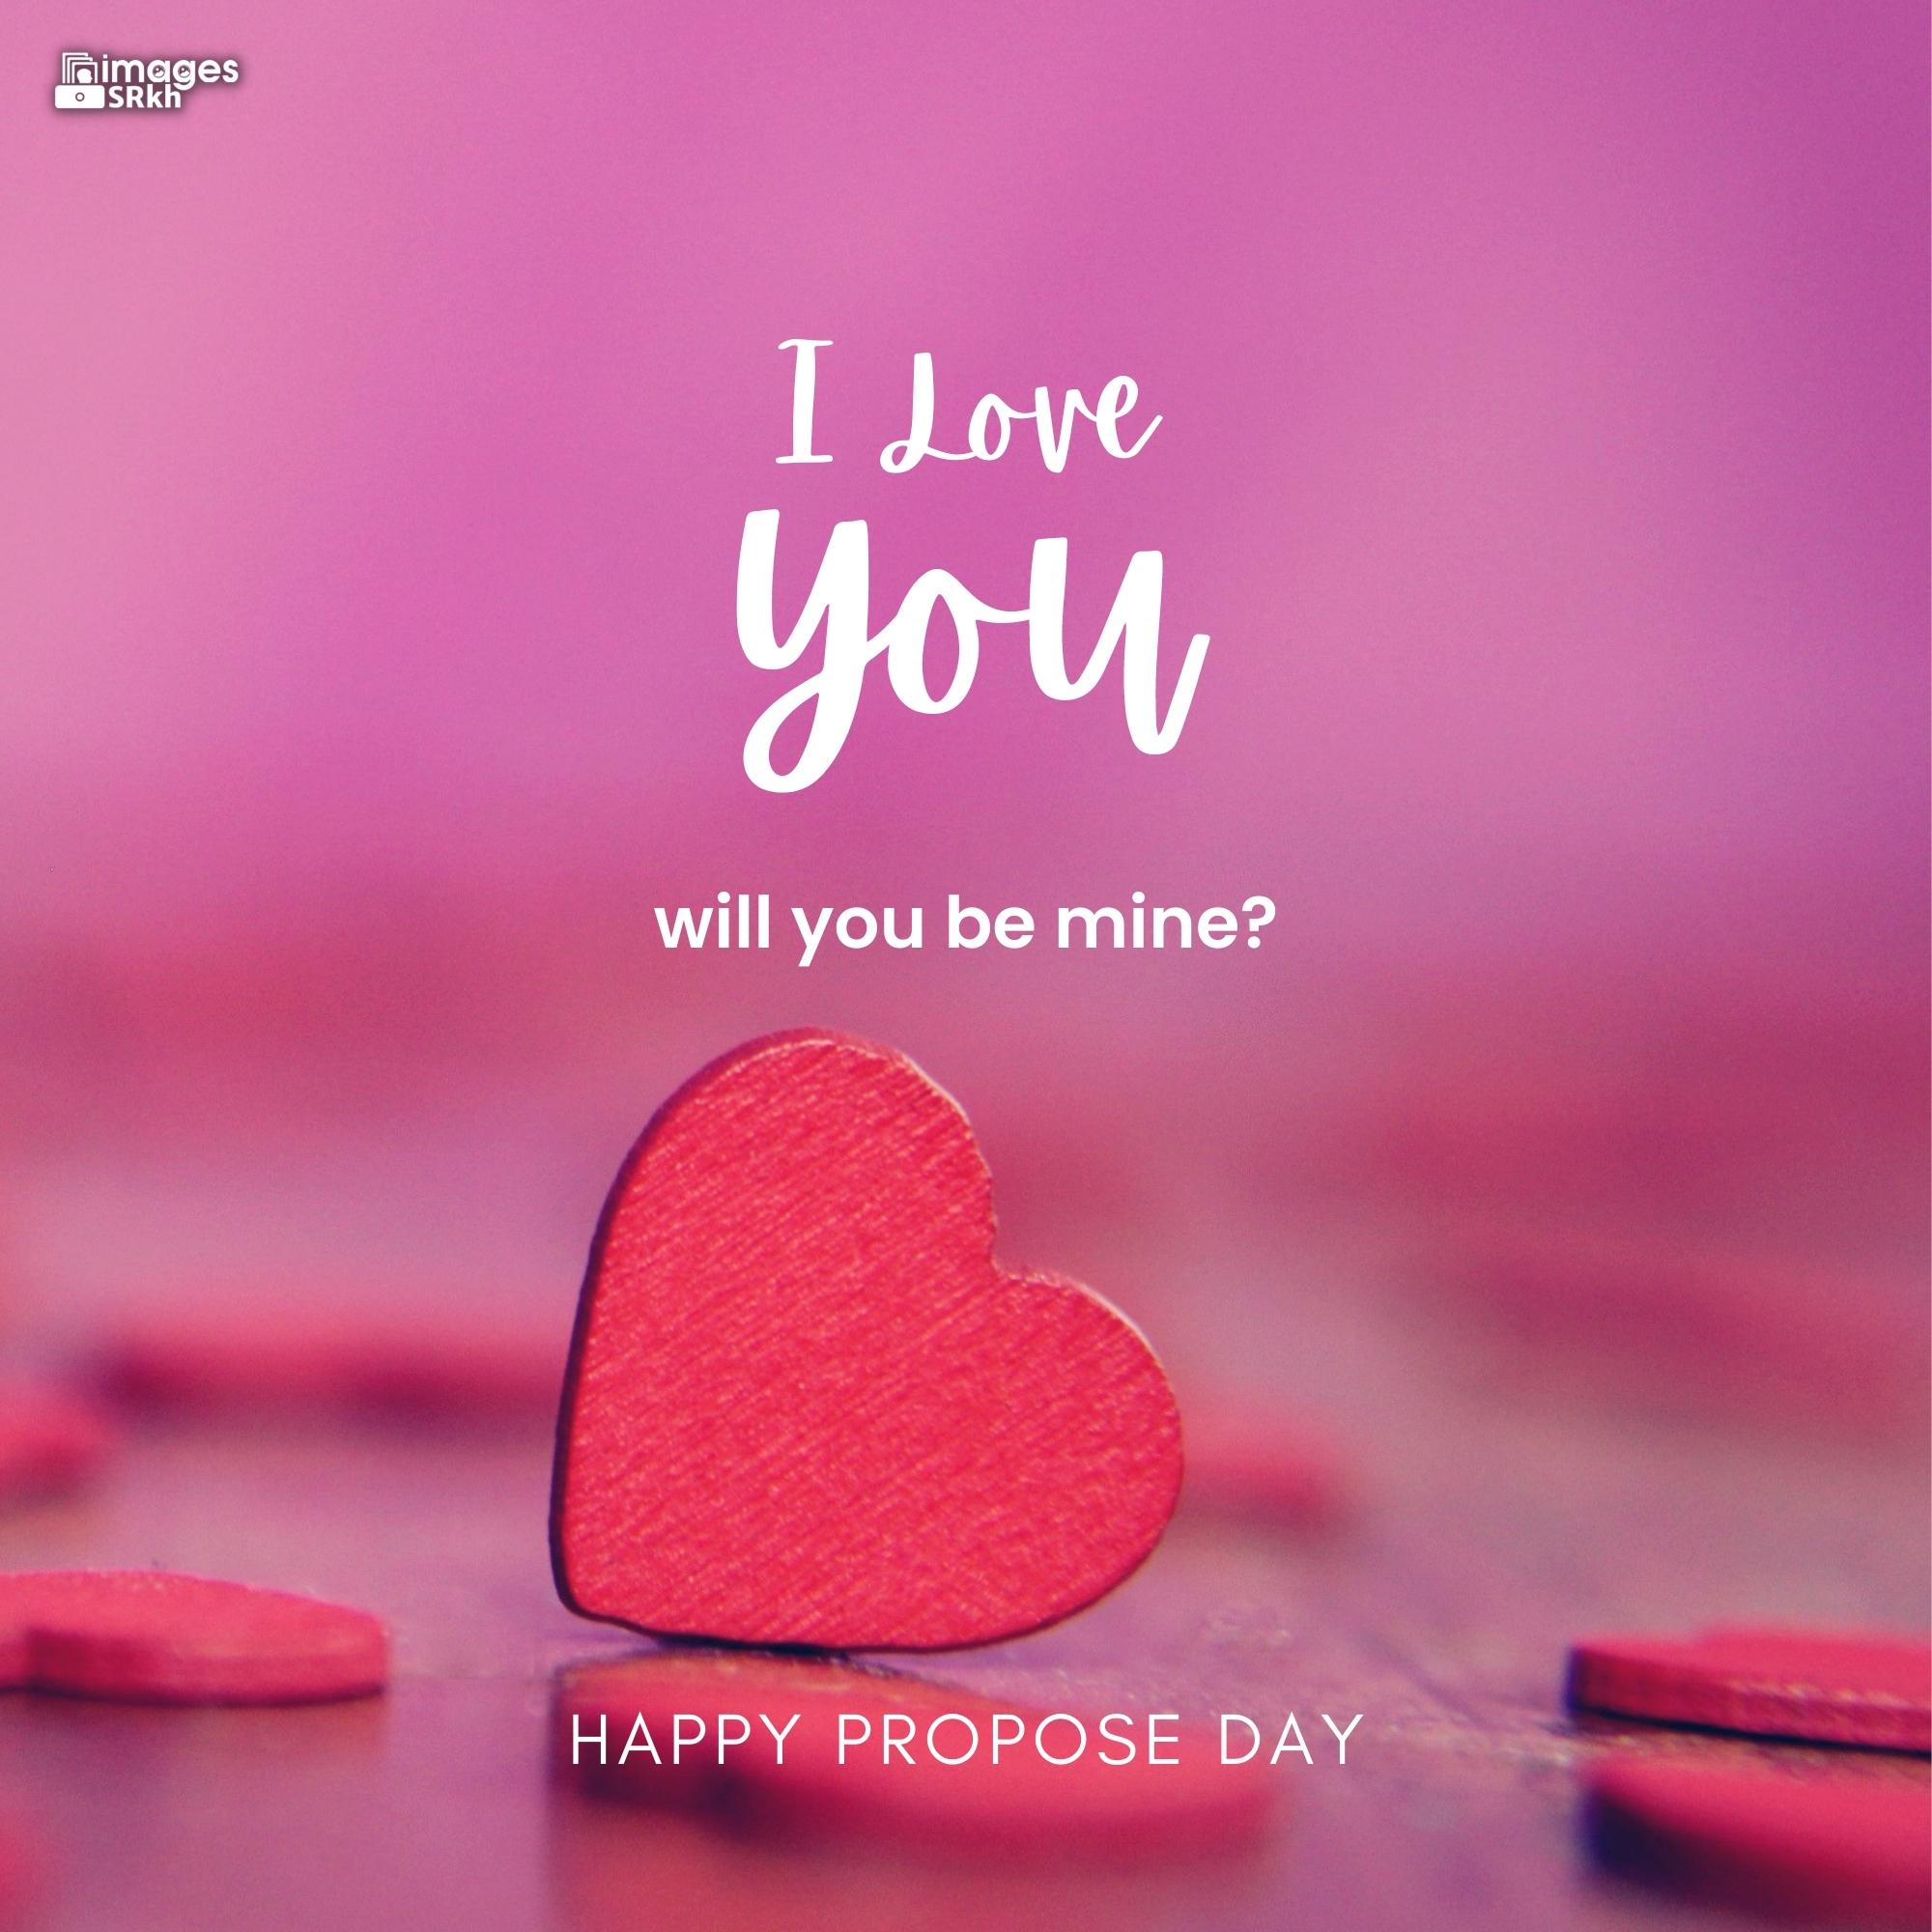 Happy Propose Day Images | 429 | I love you will you be mine